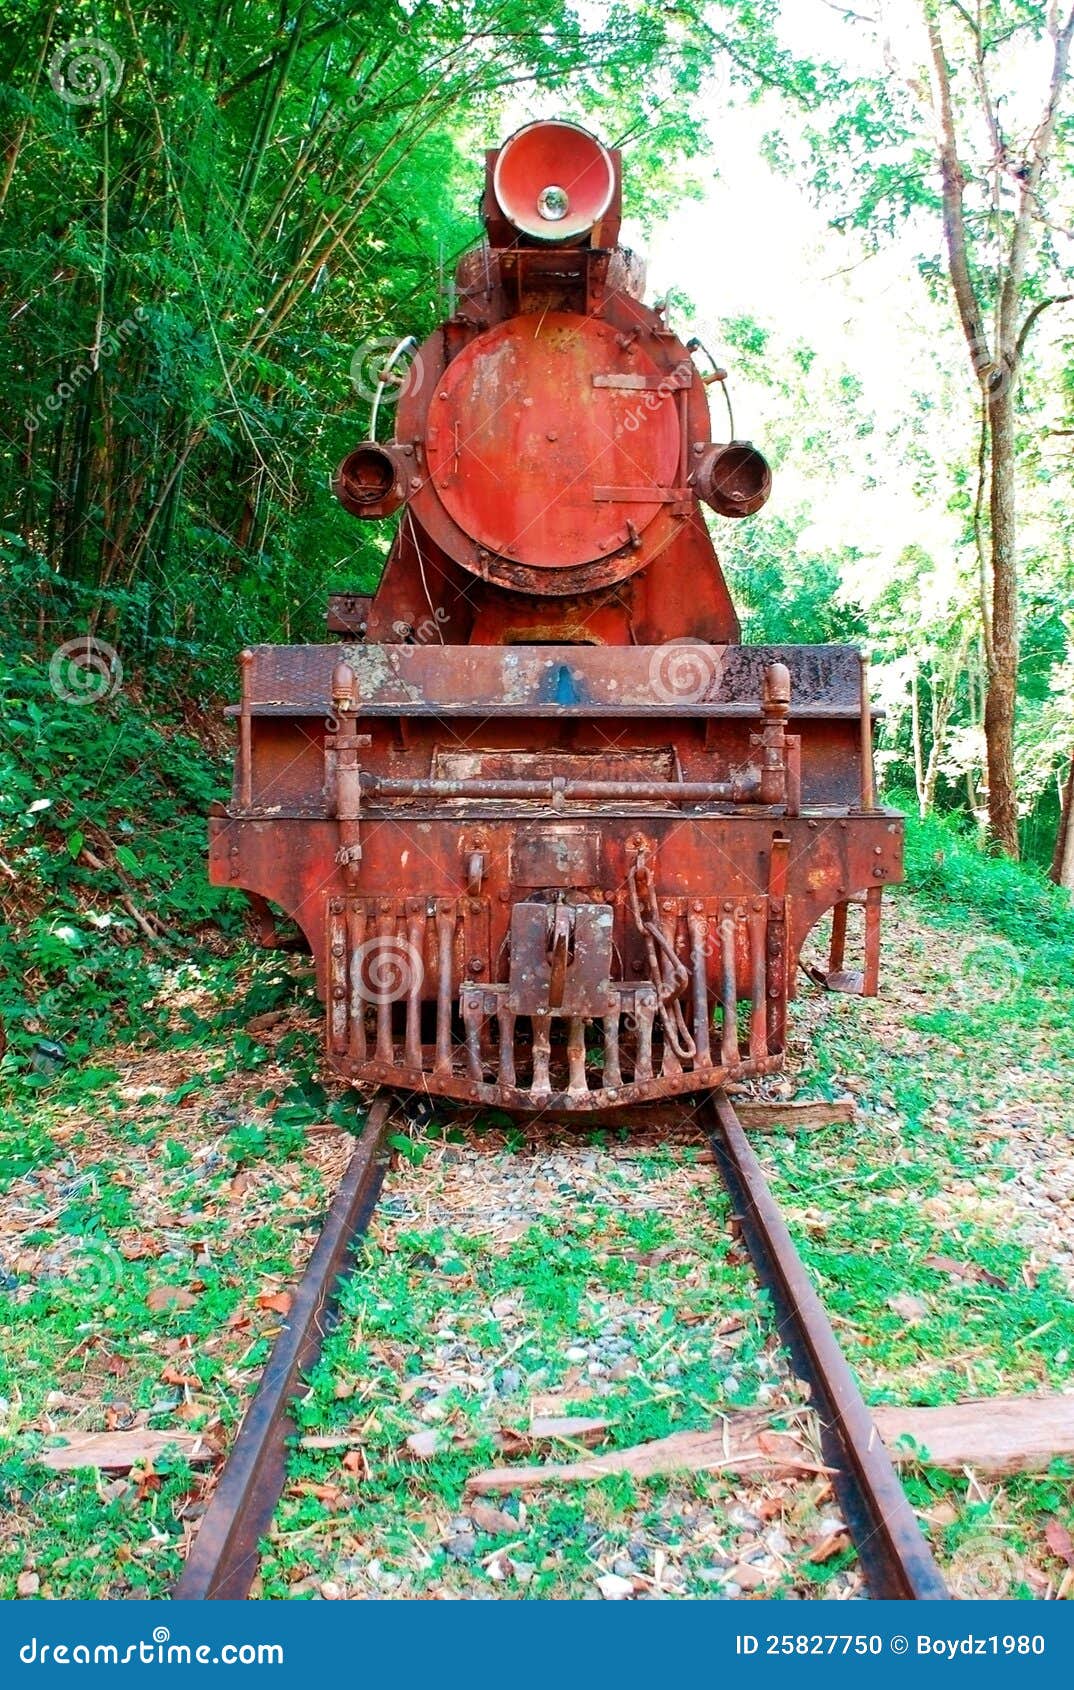 Front View Of The Old Train Stock Photo - Image: 25827750